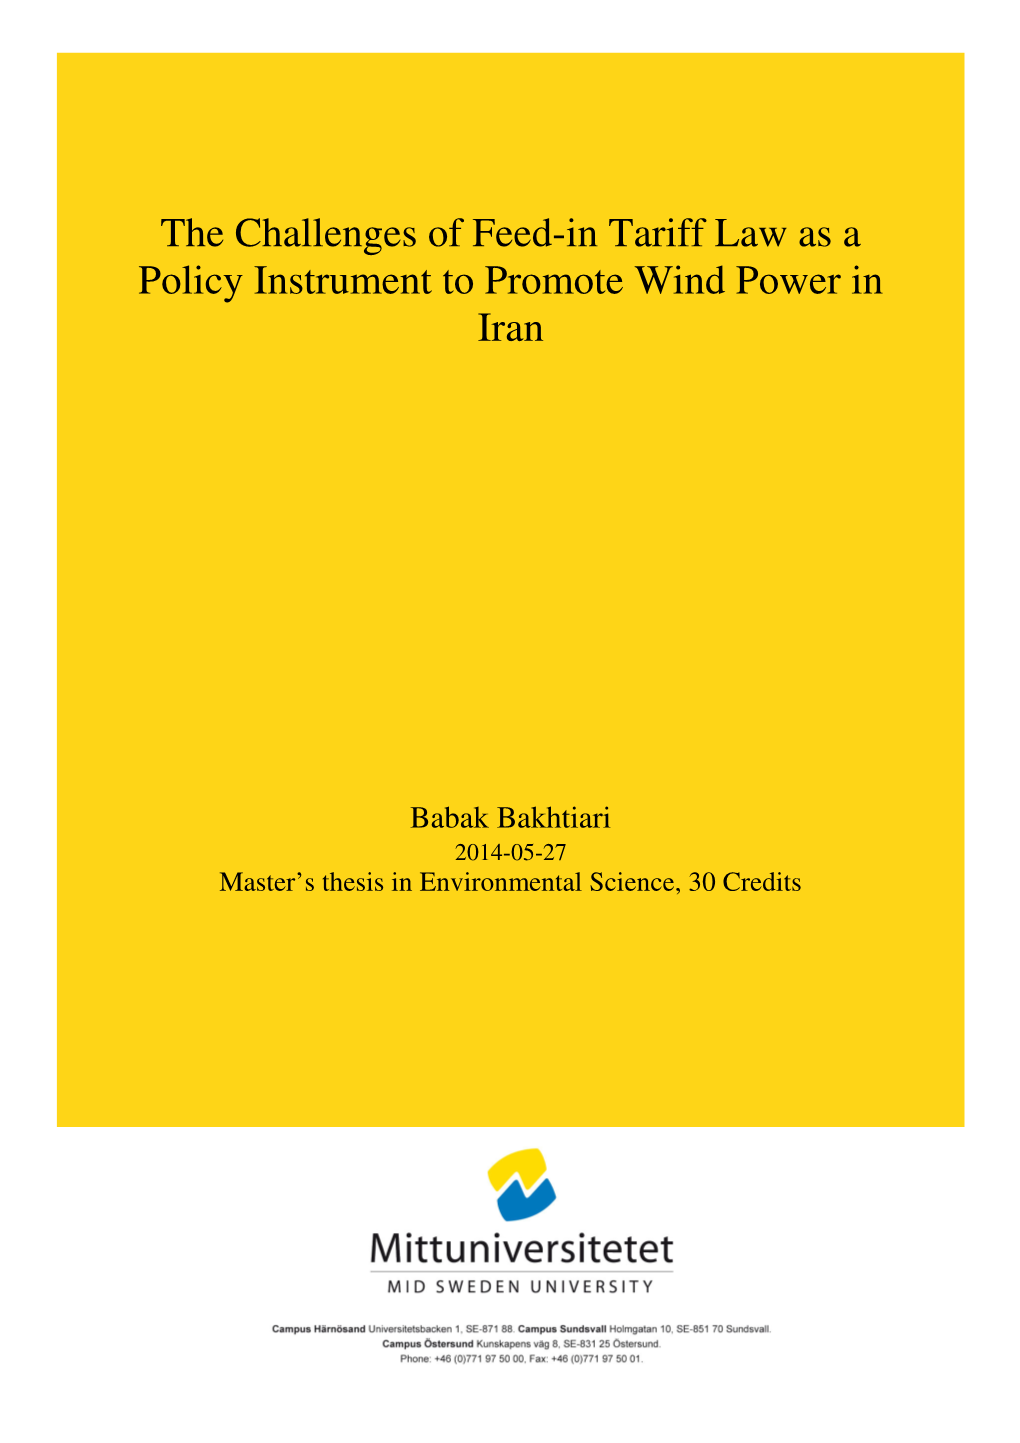 The Challenges of Feed-In Tariff Law As a Policy Instrument to Promote Wind Power in Iran